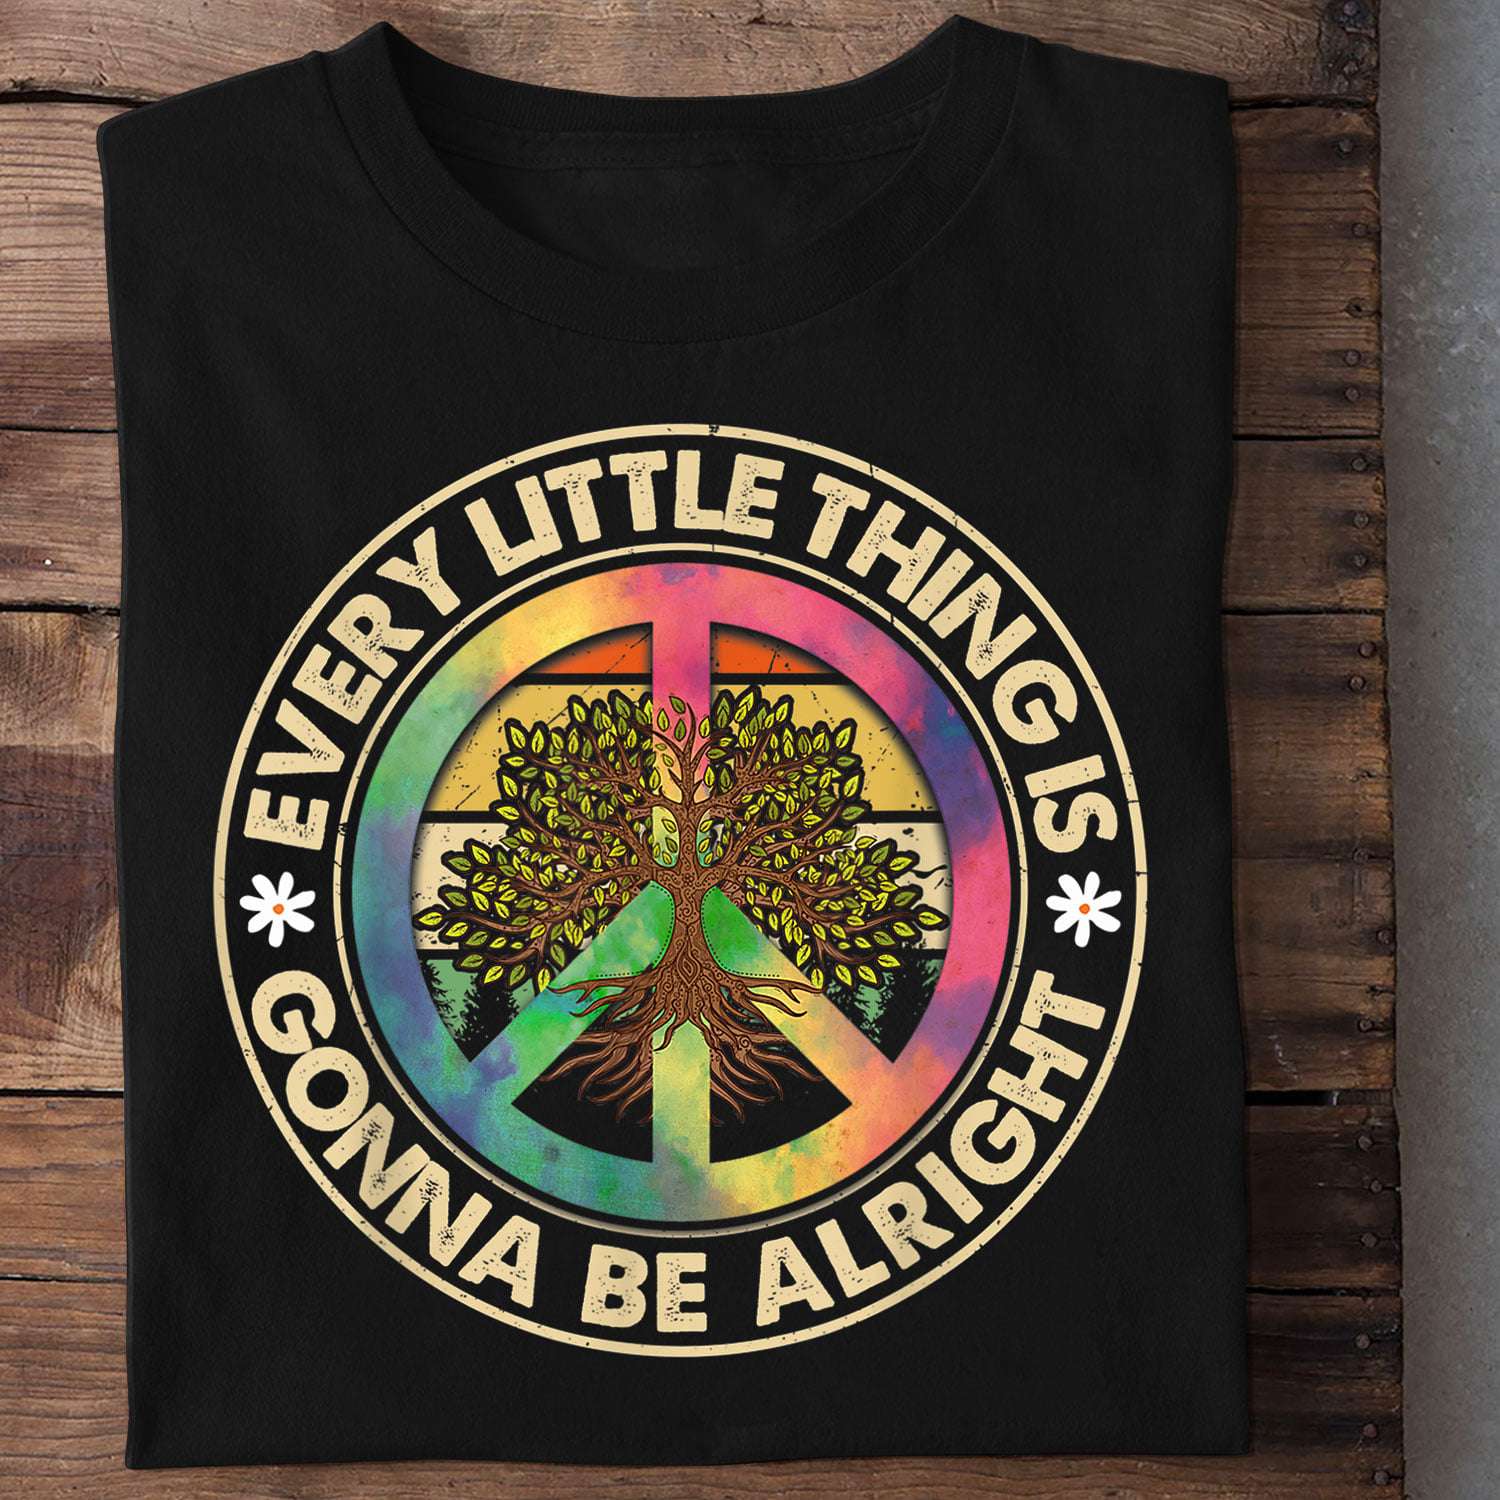 Hippie Tree T-shirt - Every little thing is gonna be alright